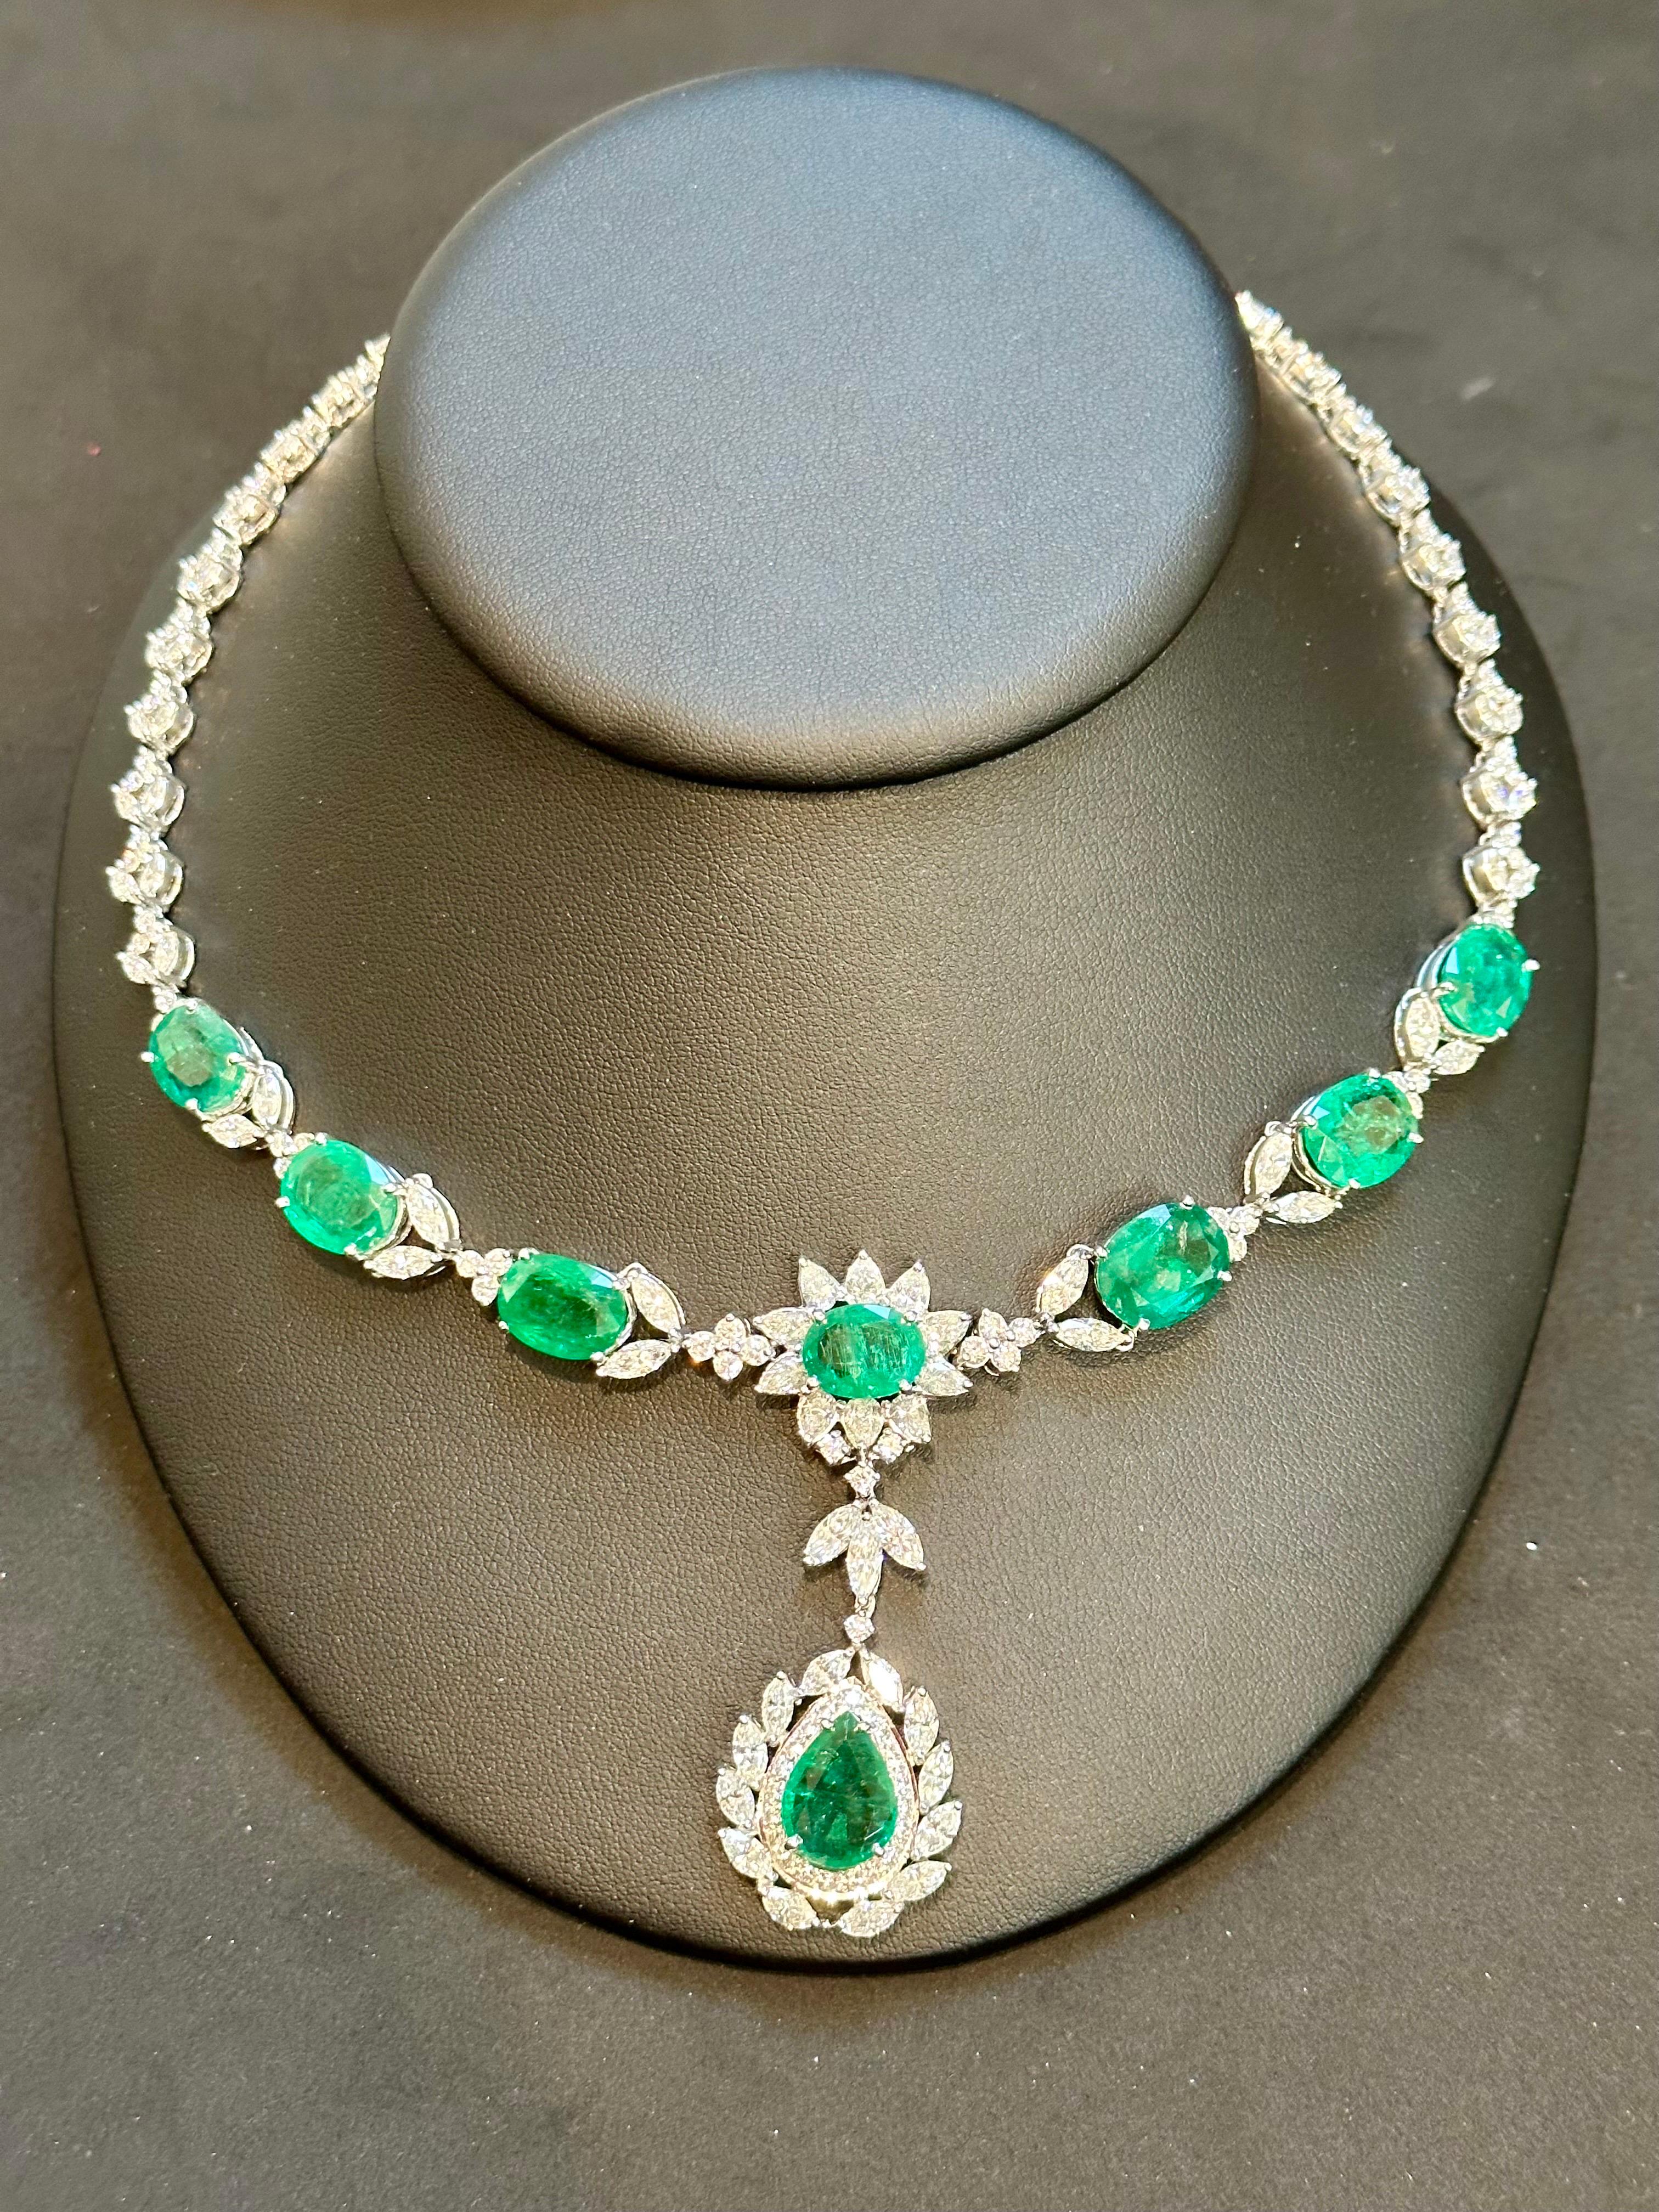 GIA Certified 56 Ct Zambian Emerald & 38 Ct Diamond Fringe Necklace 18KWG Bridal For Sale 4